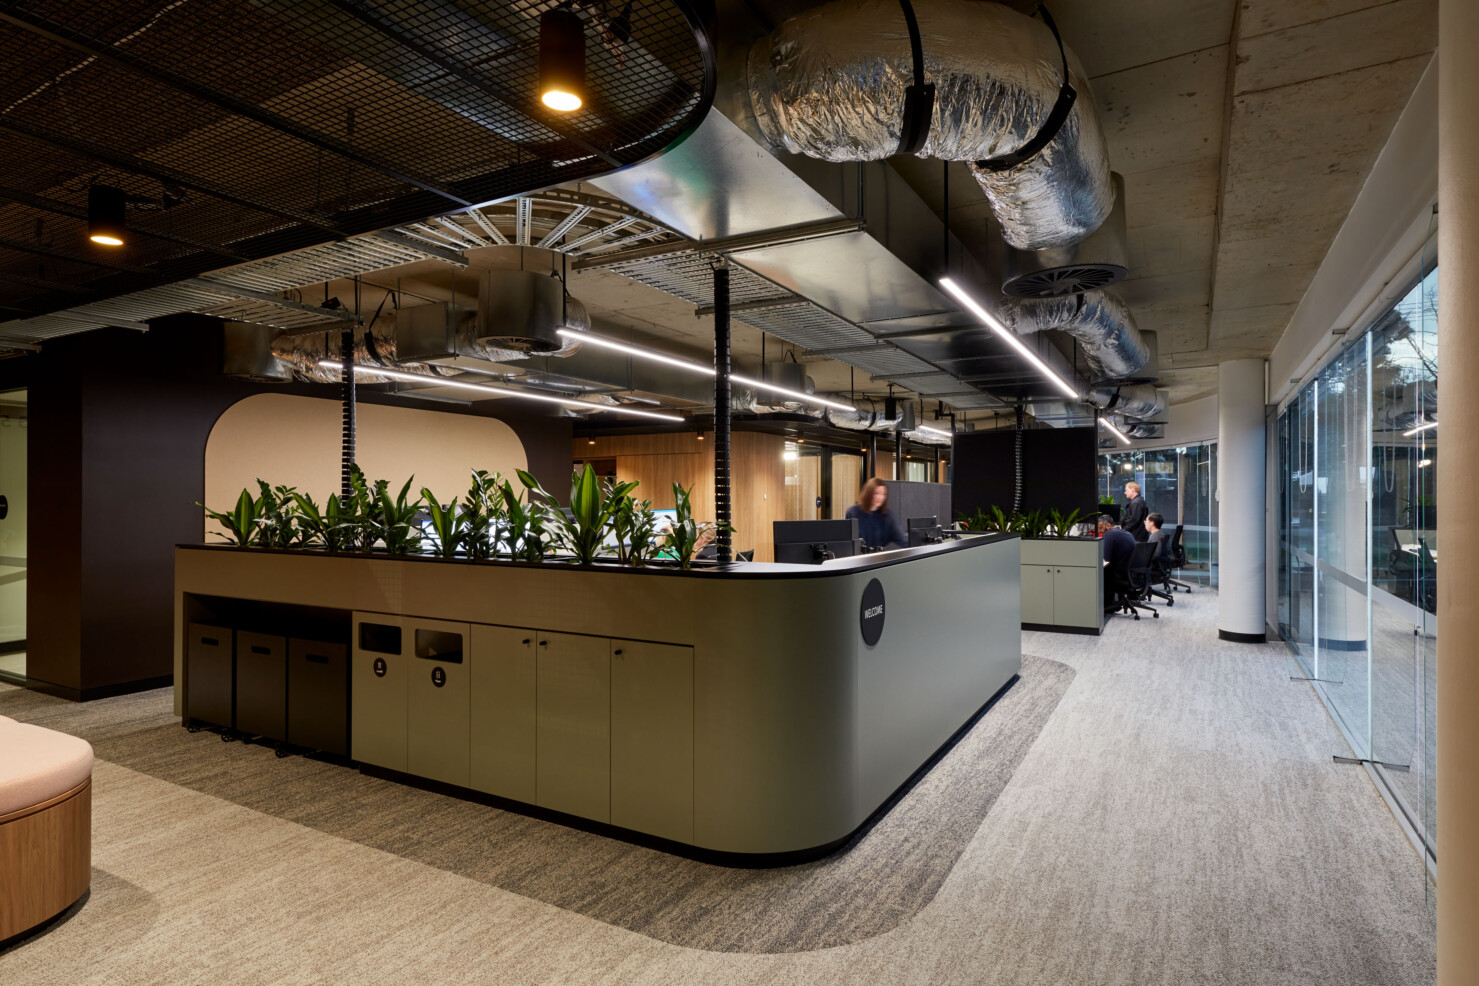 A curved reception counter leads into the open plan workspace. Full height windows wrap the building corner. Exposed ducting, black steel and concrete roof are softened by the pale sand tones and patterns of the carpet, the pale green timber joinery and planter boxes with oxygen purifying plants.